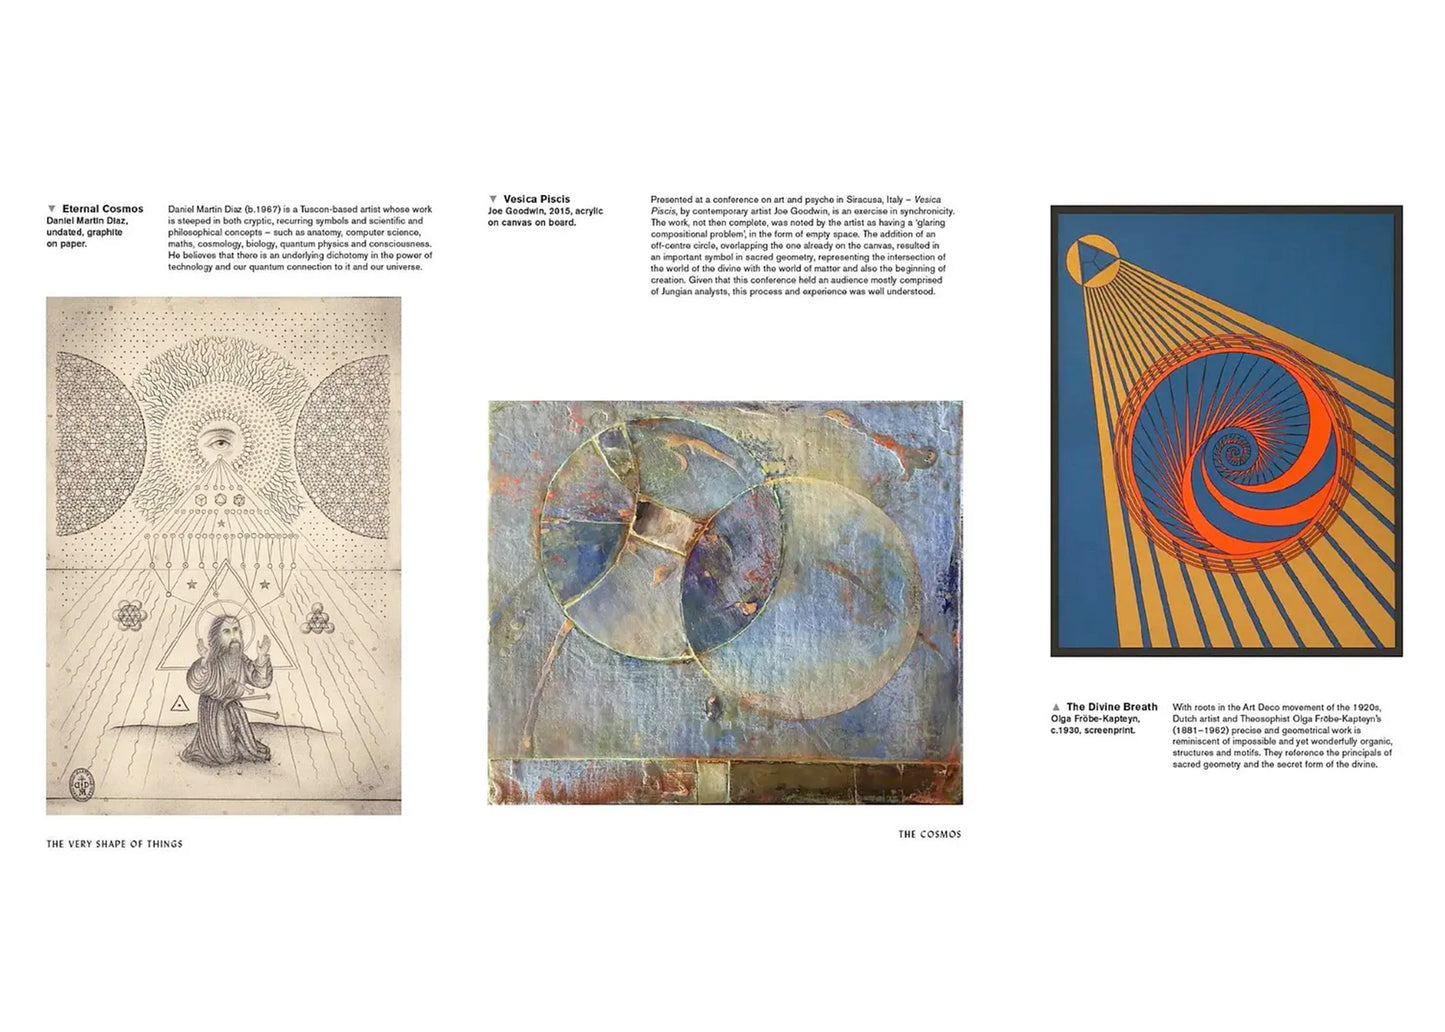 The Art of the Occult: Visual Sourcebook for the Modern Mystic